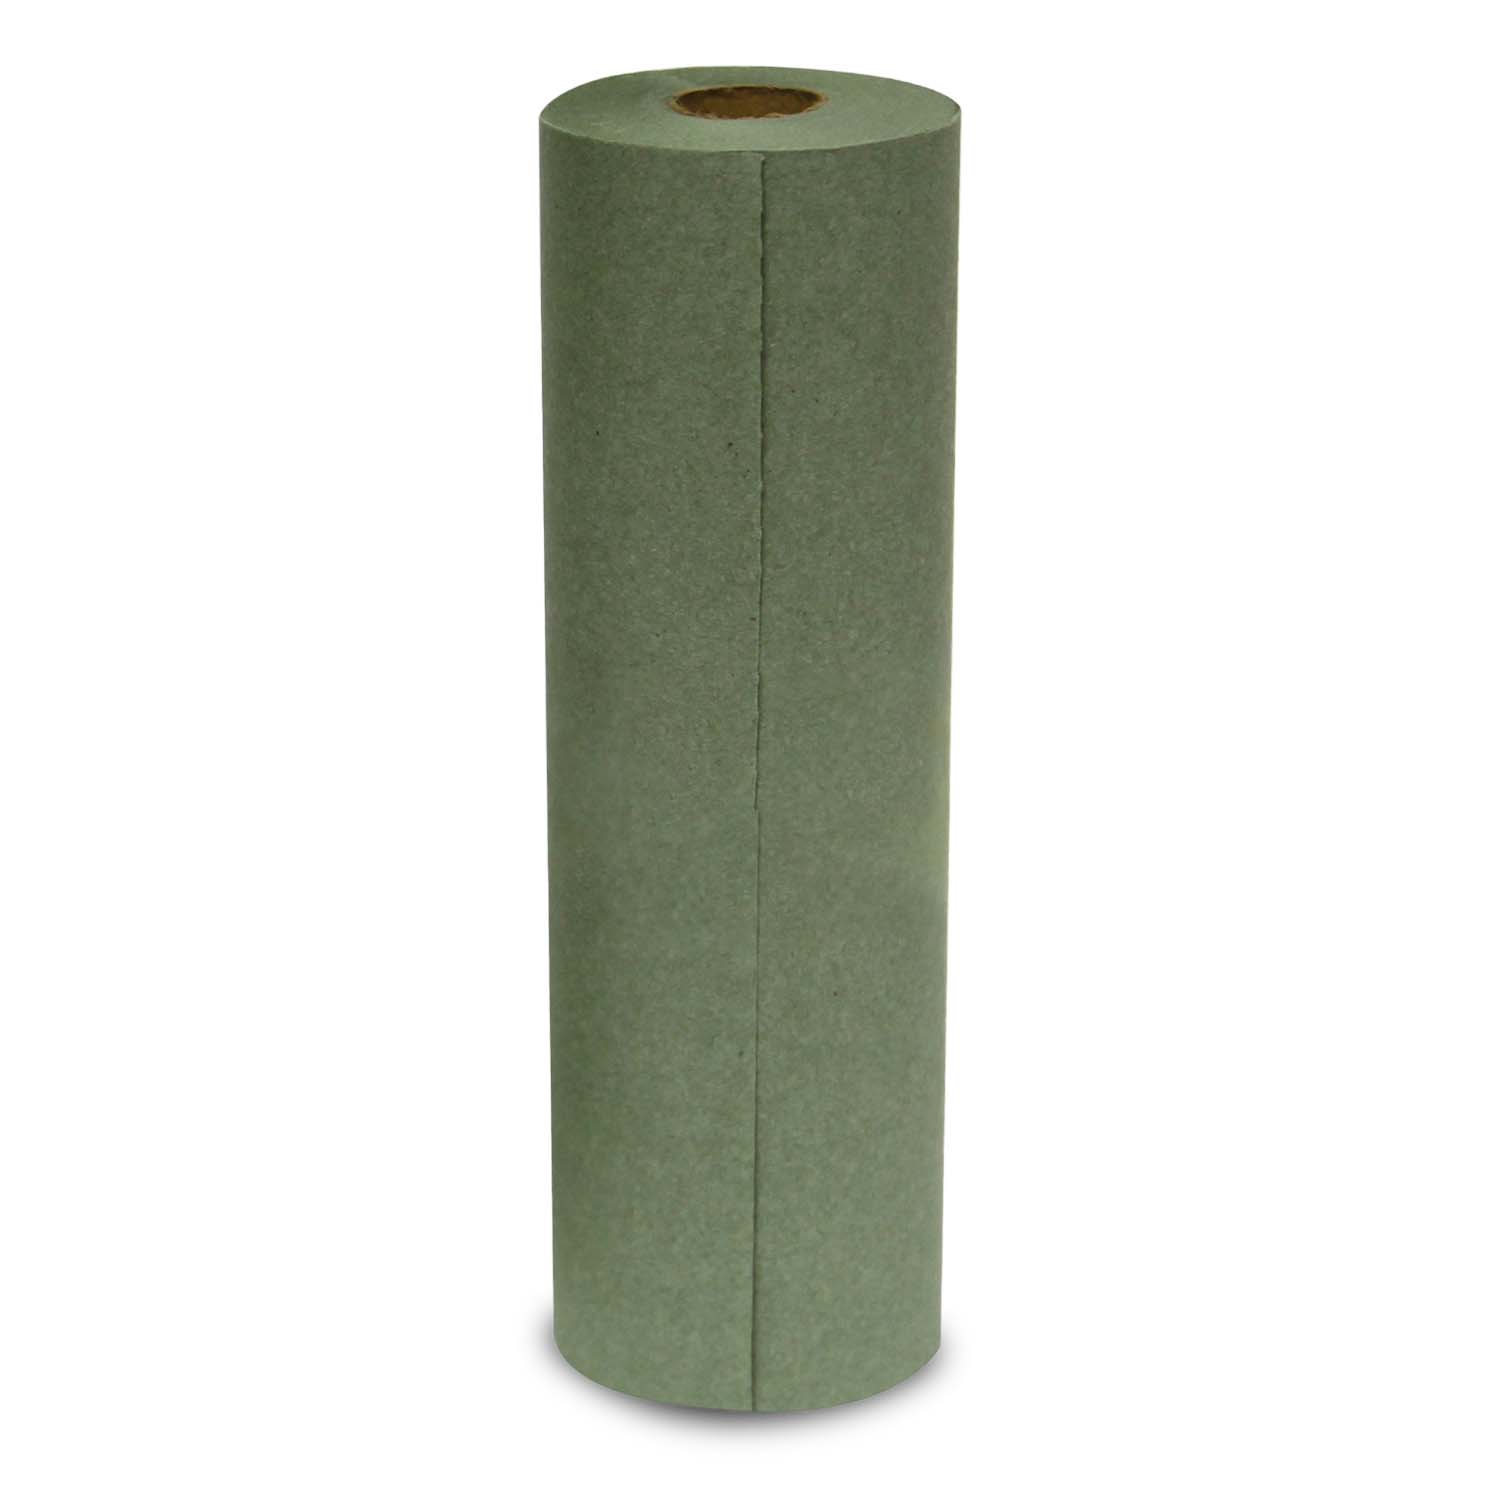  Quality Green Masking Paper 750' 